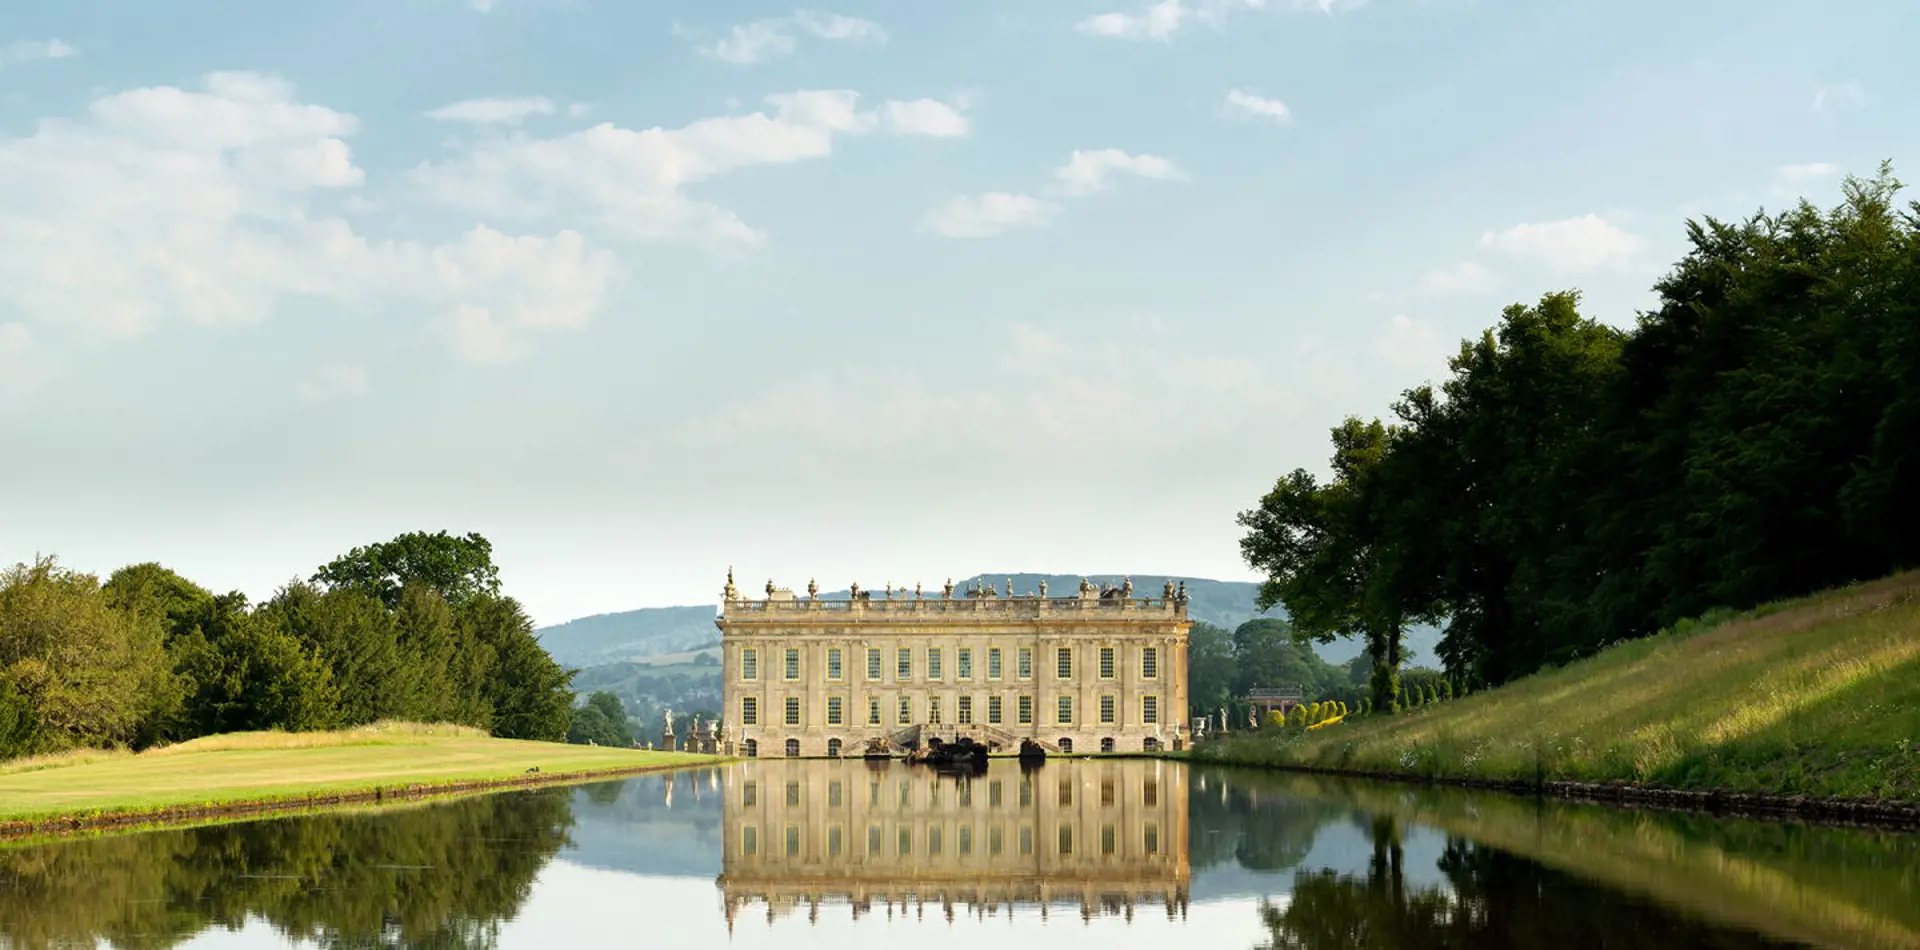 Stay in touch with Chatsworth